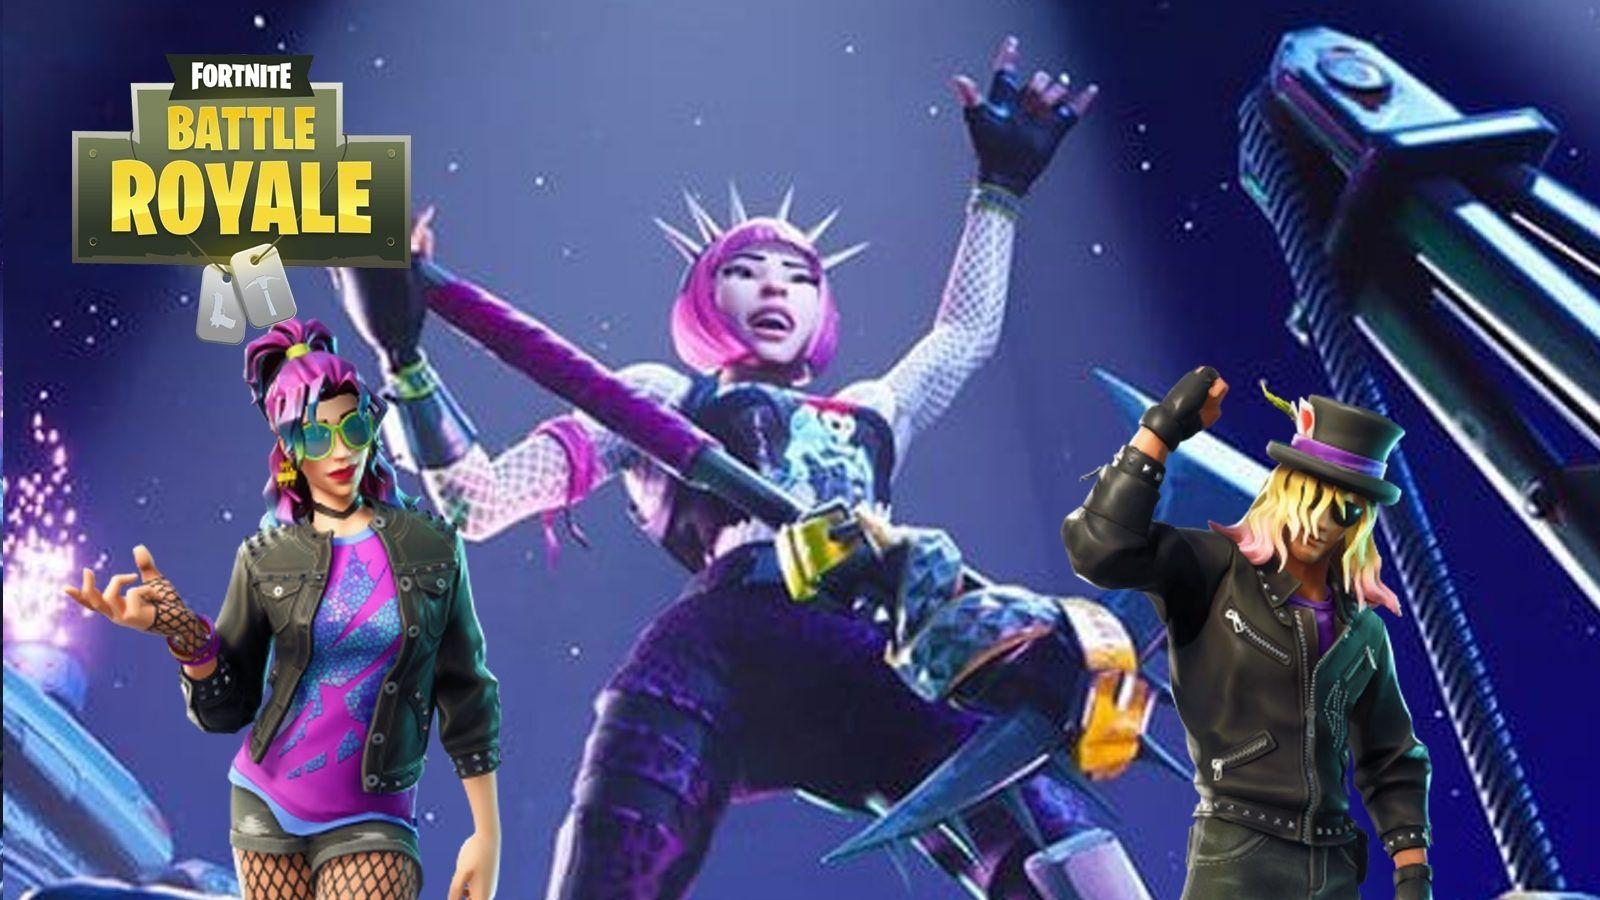 Fortnite Twitter Hints at Power Chord Skin being Available